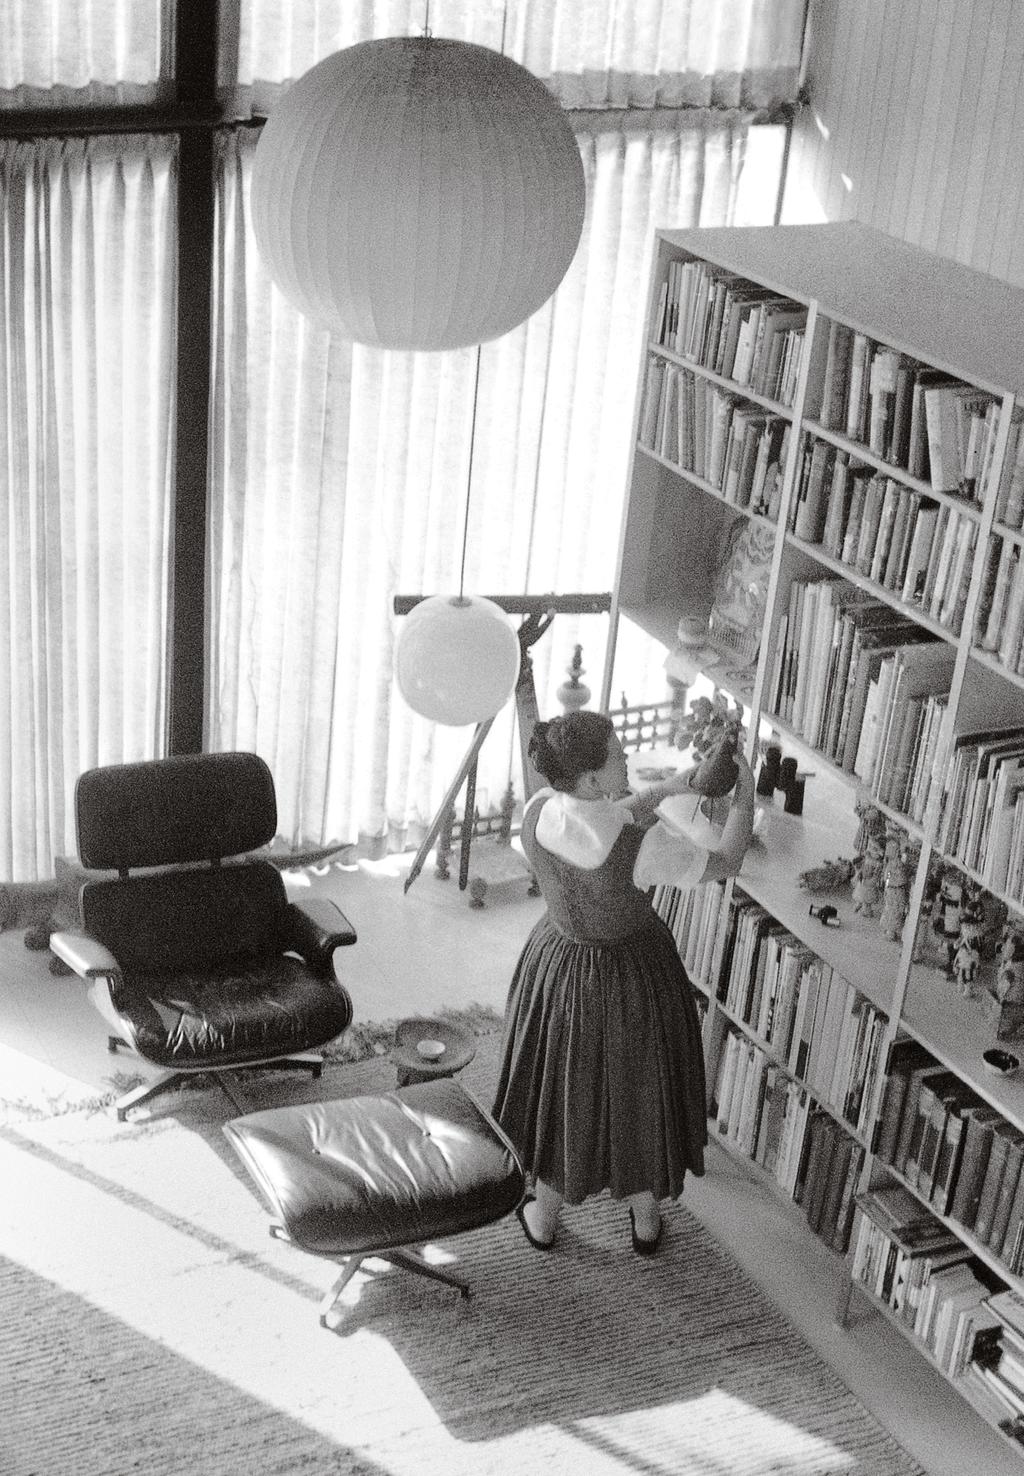 Lounge Chair: Celebrating 60 Years of Production When Charles and Ray Eames designed the Lounge Chair in 956, their primary aim was to create a soft and comfortable piece of seating furniture.